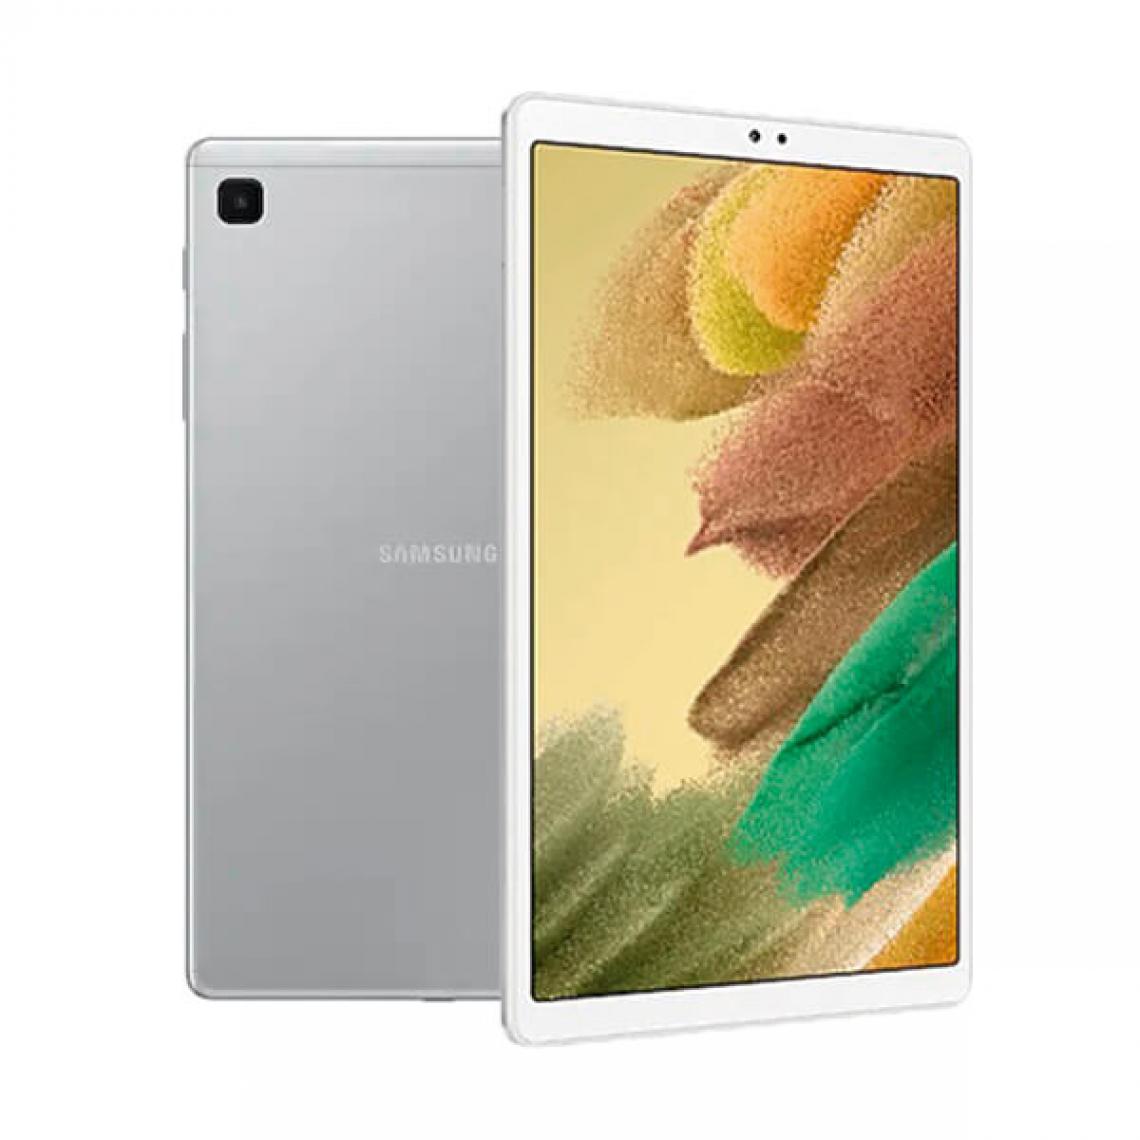 Samsung - Samsung Galaxy Tab A7 Lite 3Go/32Go Wi-Fi Argent (Argent) SM-T220 - Tablette Android